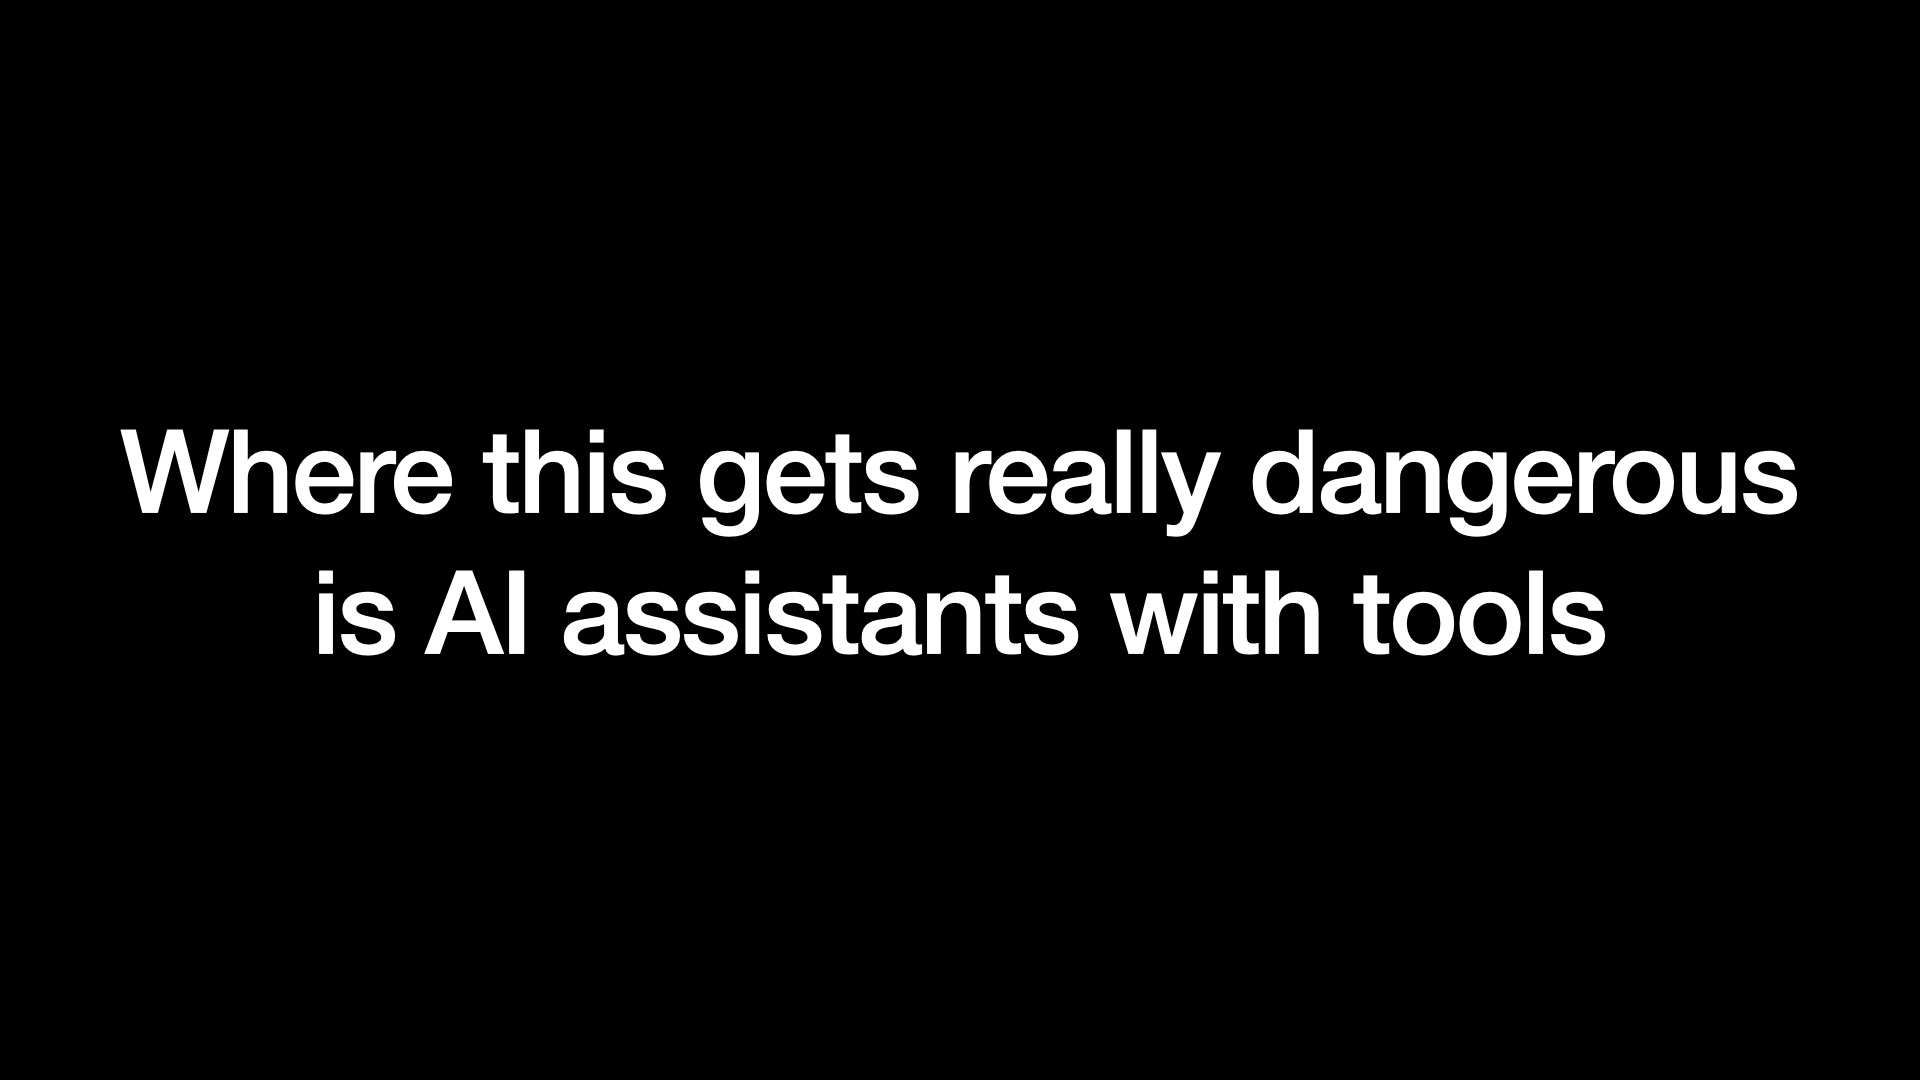 Where this gets really dangerous is AI assistants with tools